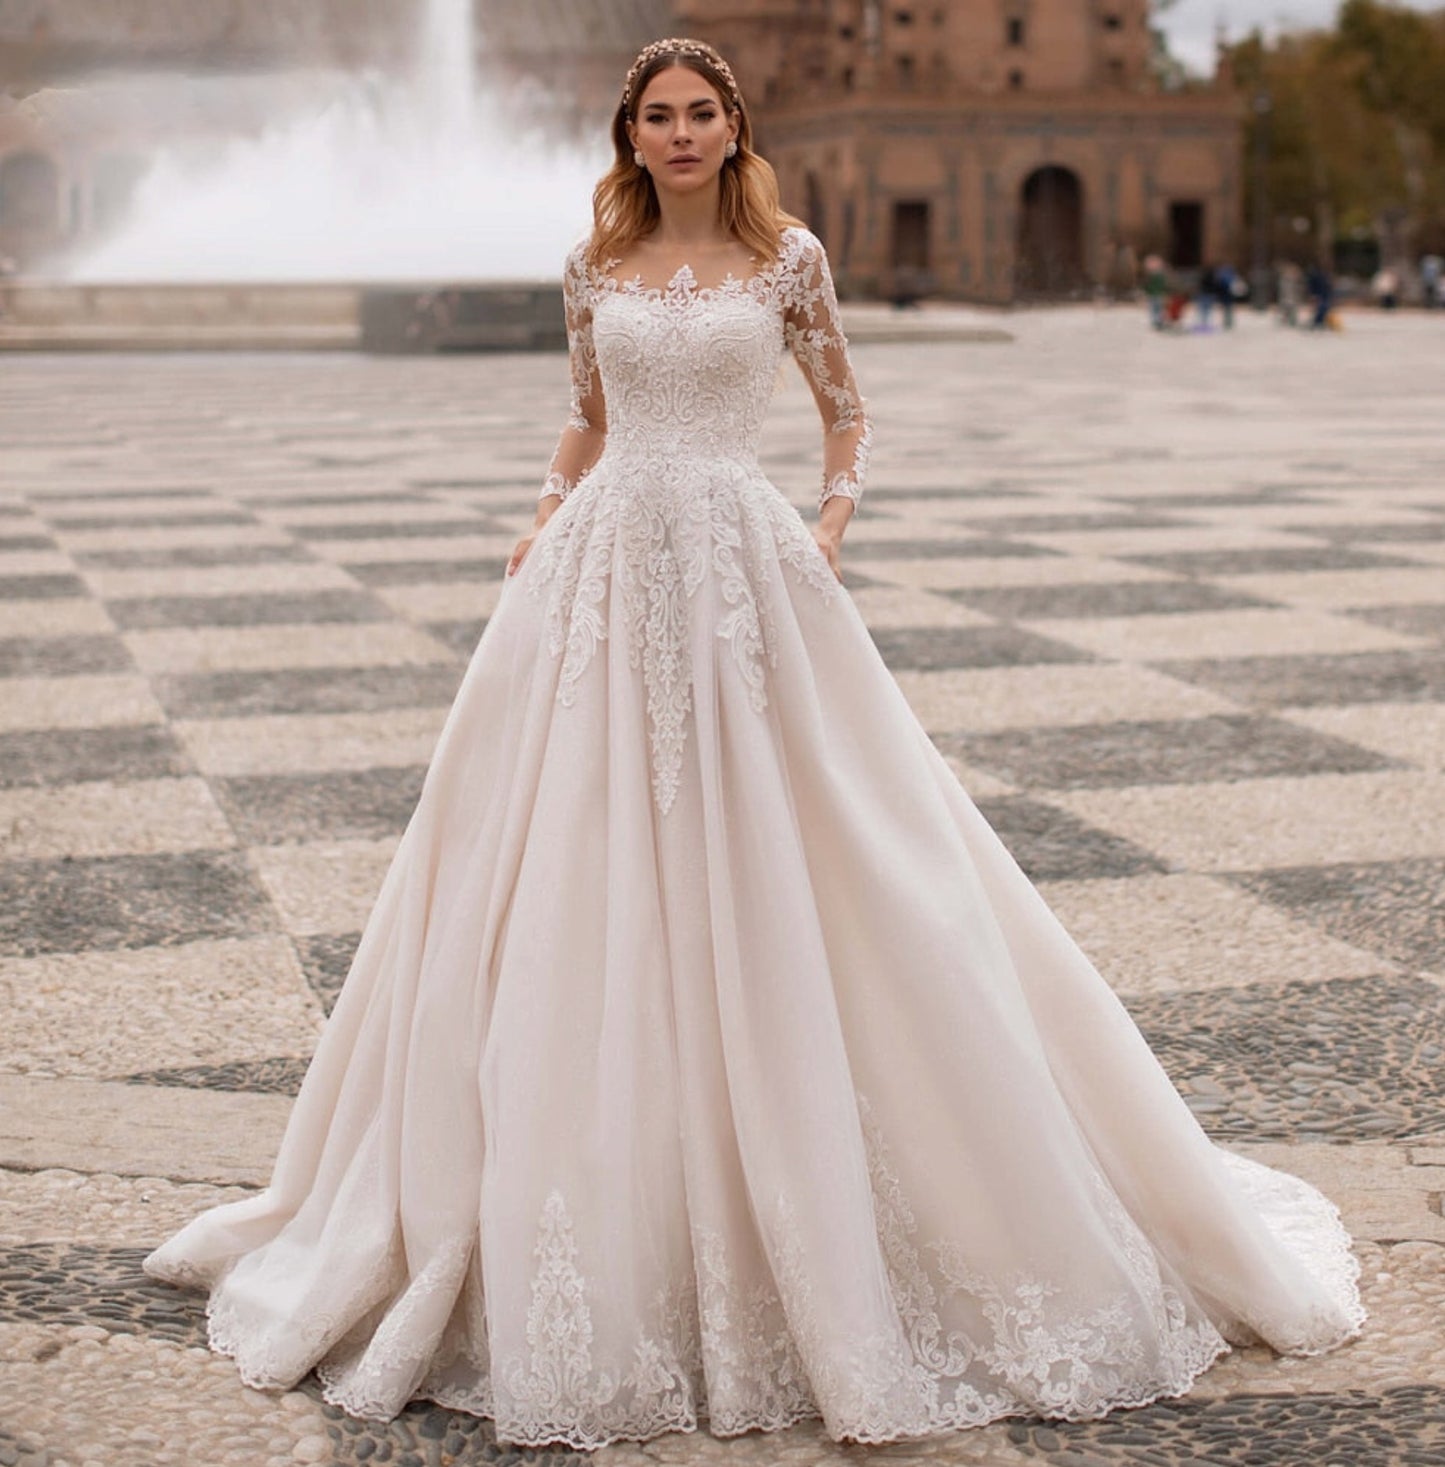 White One | Find the one - Wedding dresses with a youthful twist